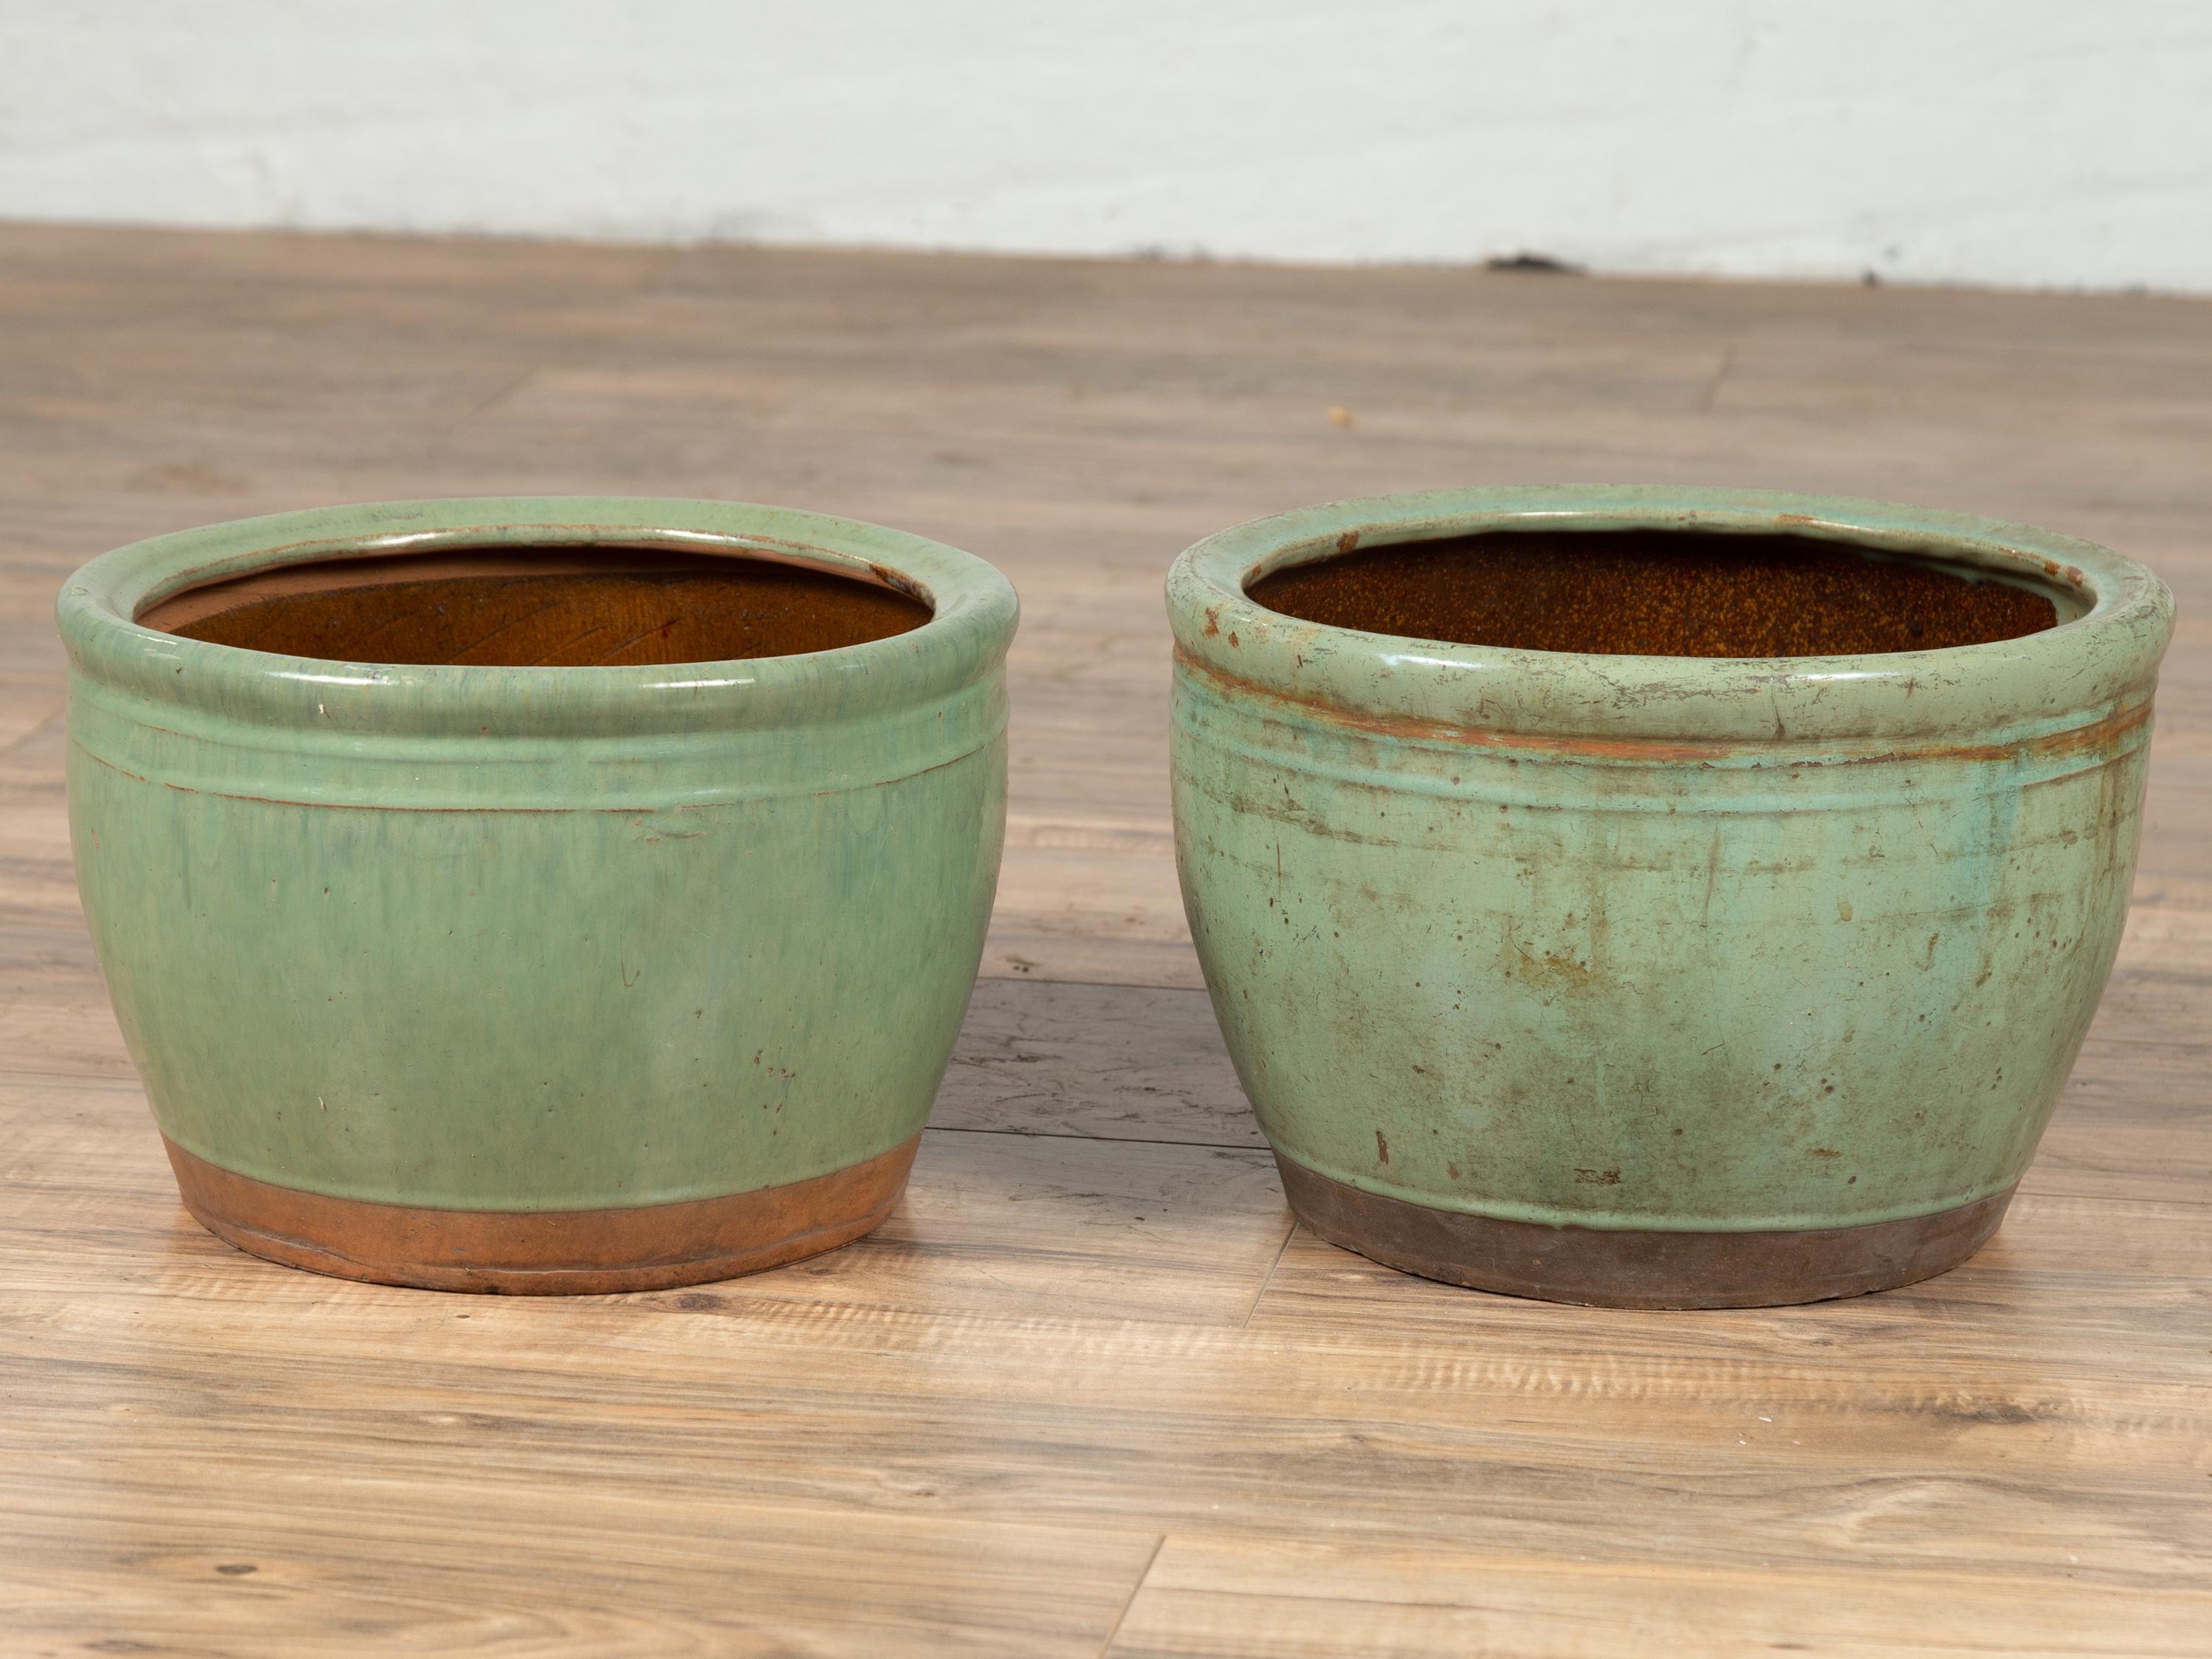 A vintage near pair of Chinese large ceramic planters from the mid-20th century, with soft green glazed finish. Born in China during the midcentury period, each of this pair of large planters features a circular tapering body, accented by a lovely